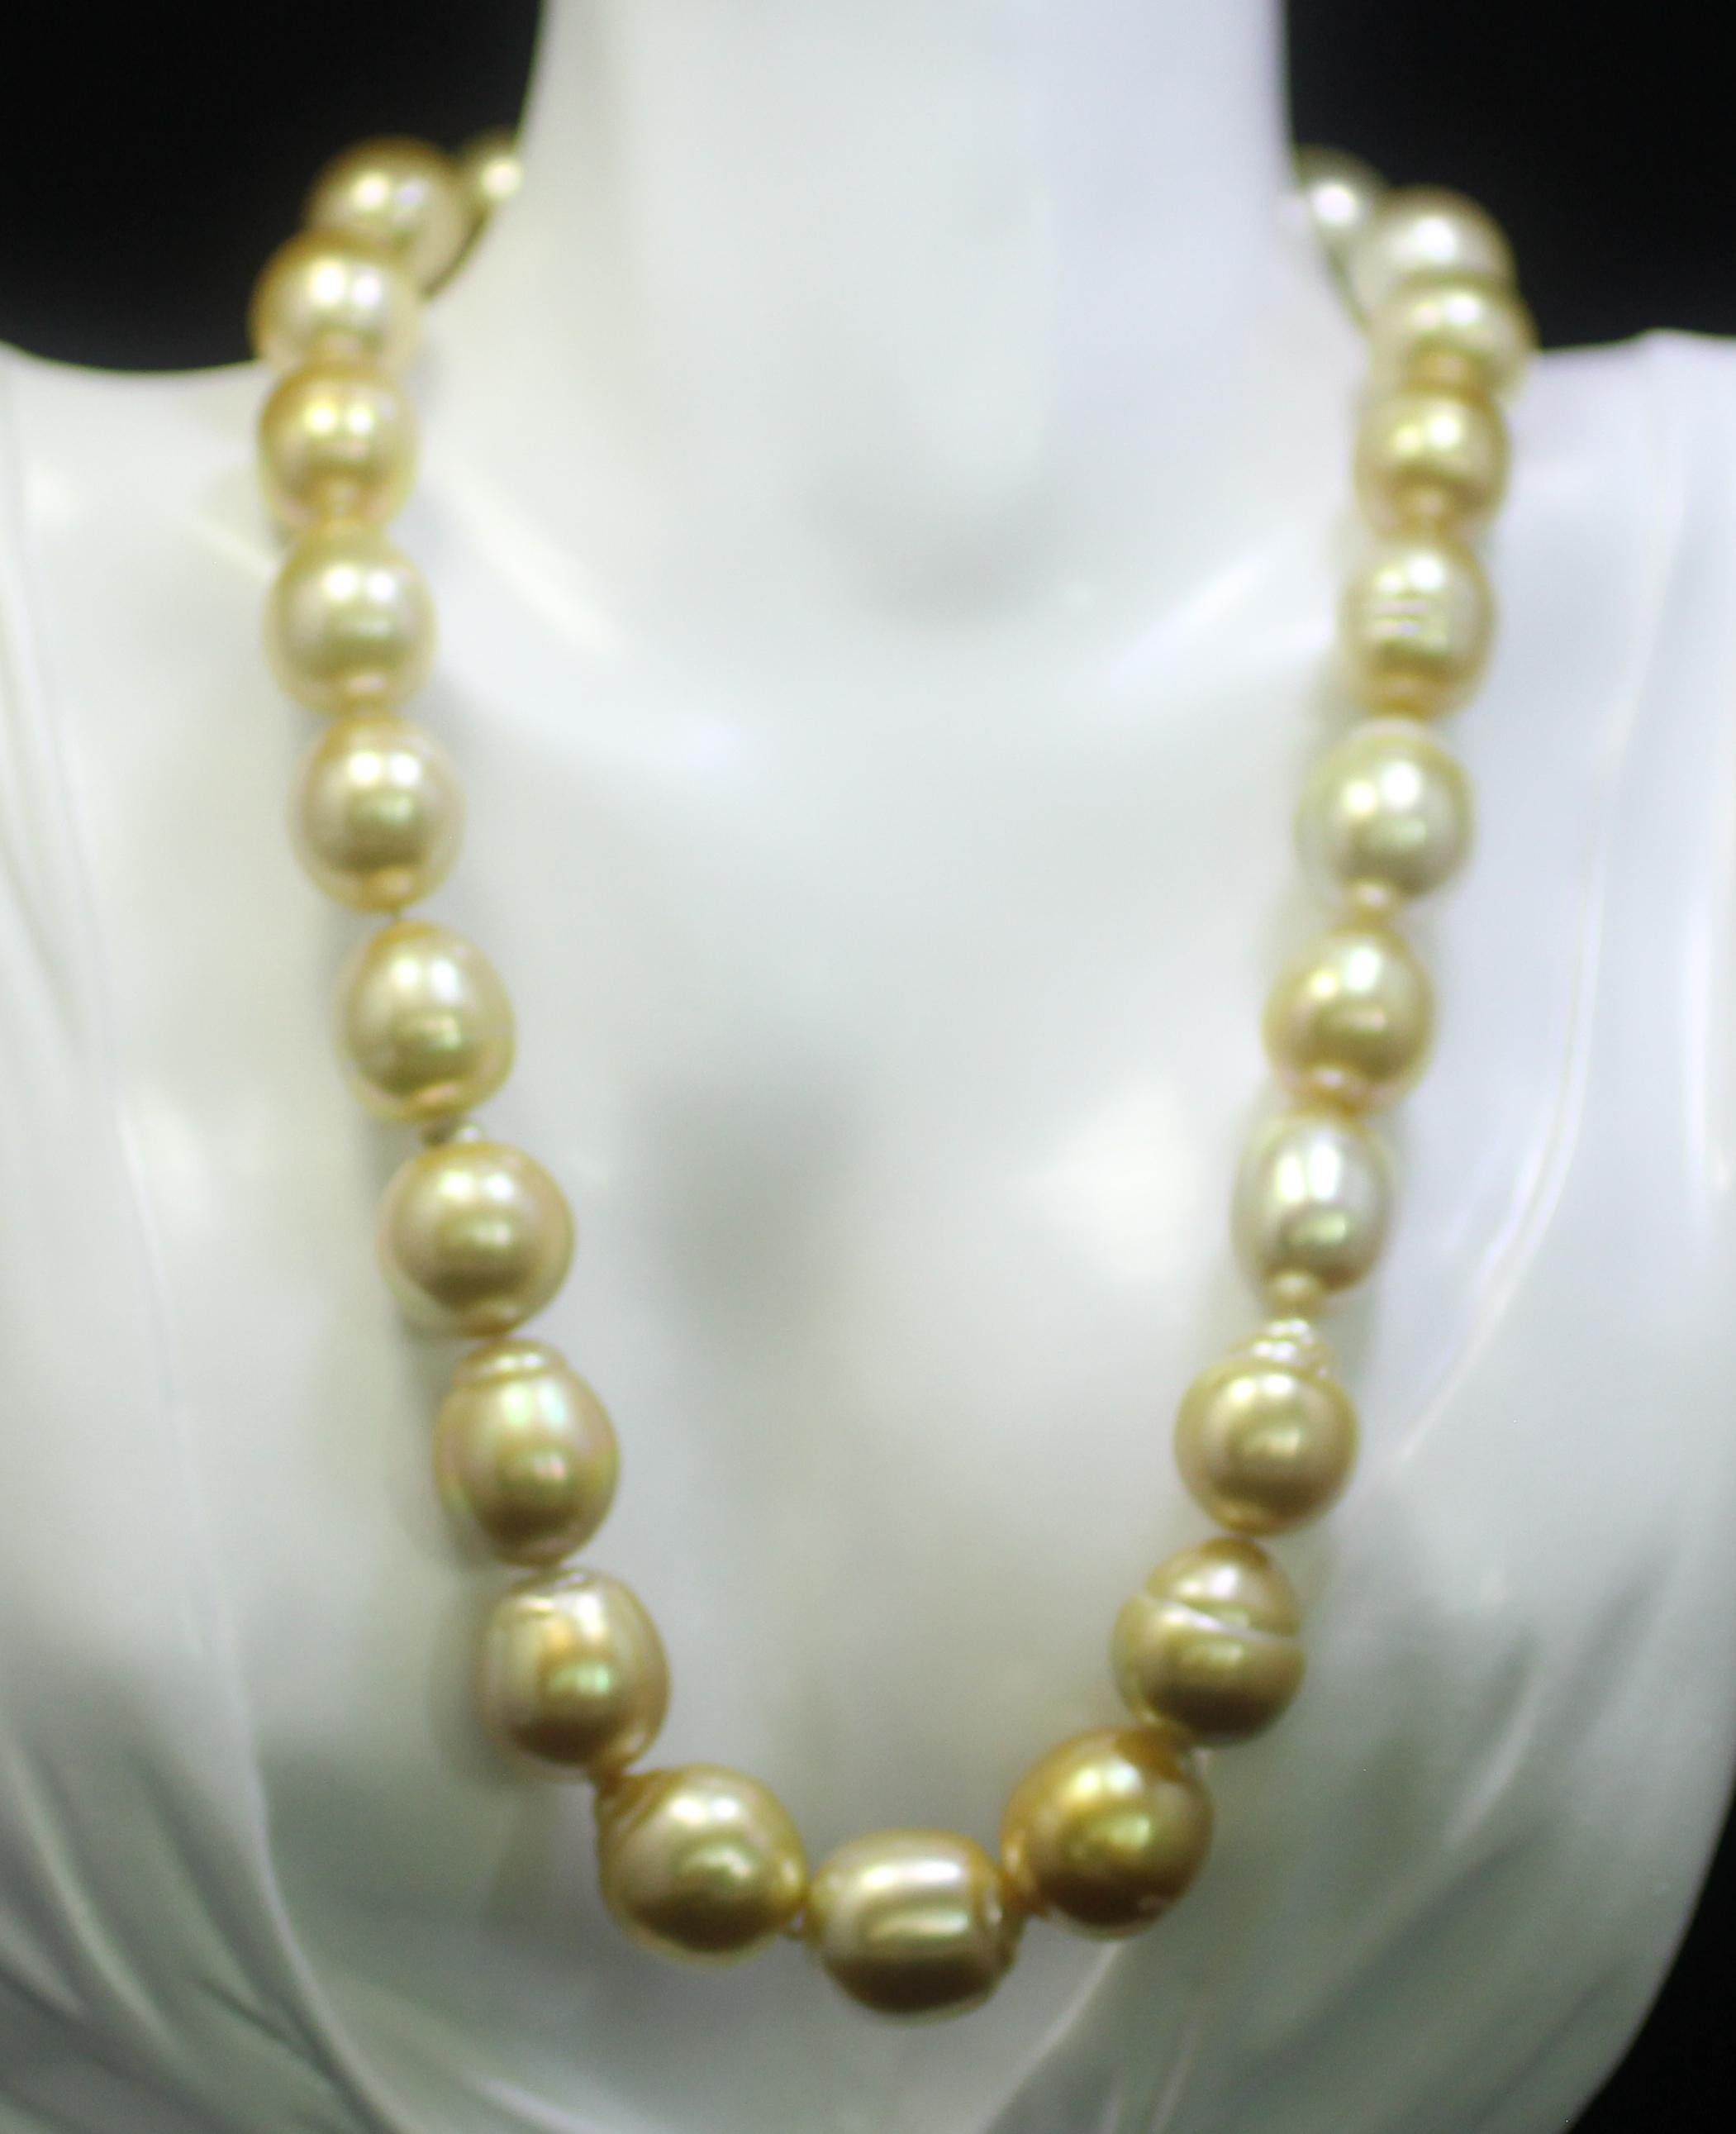 Hakimoto 18K Rare Deep Natural Golden color South Sea Baroque Pearl Necklace
18K Yellow Gold  
Weight (g): 119
Cultured Golden South Sea Pearl 
Pearl Size: 12X16mm 
Pearl Shape: Baroque 
Body color: Natural Deep Golden
Orient: Very Good
Luster: Very